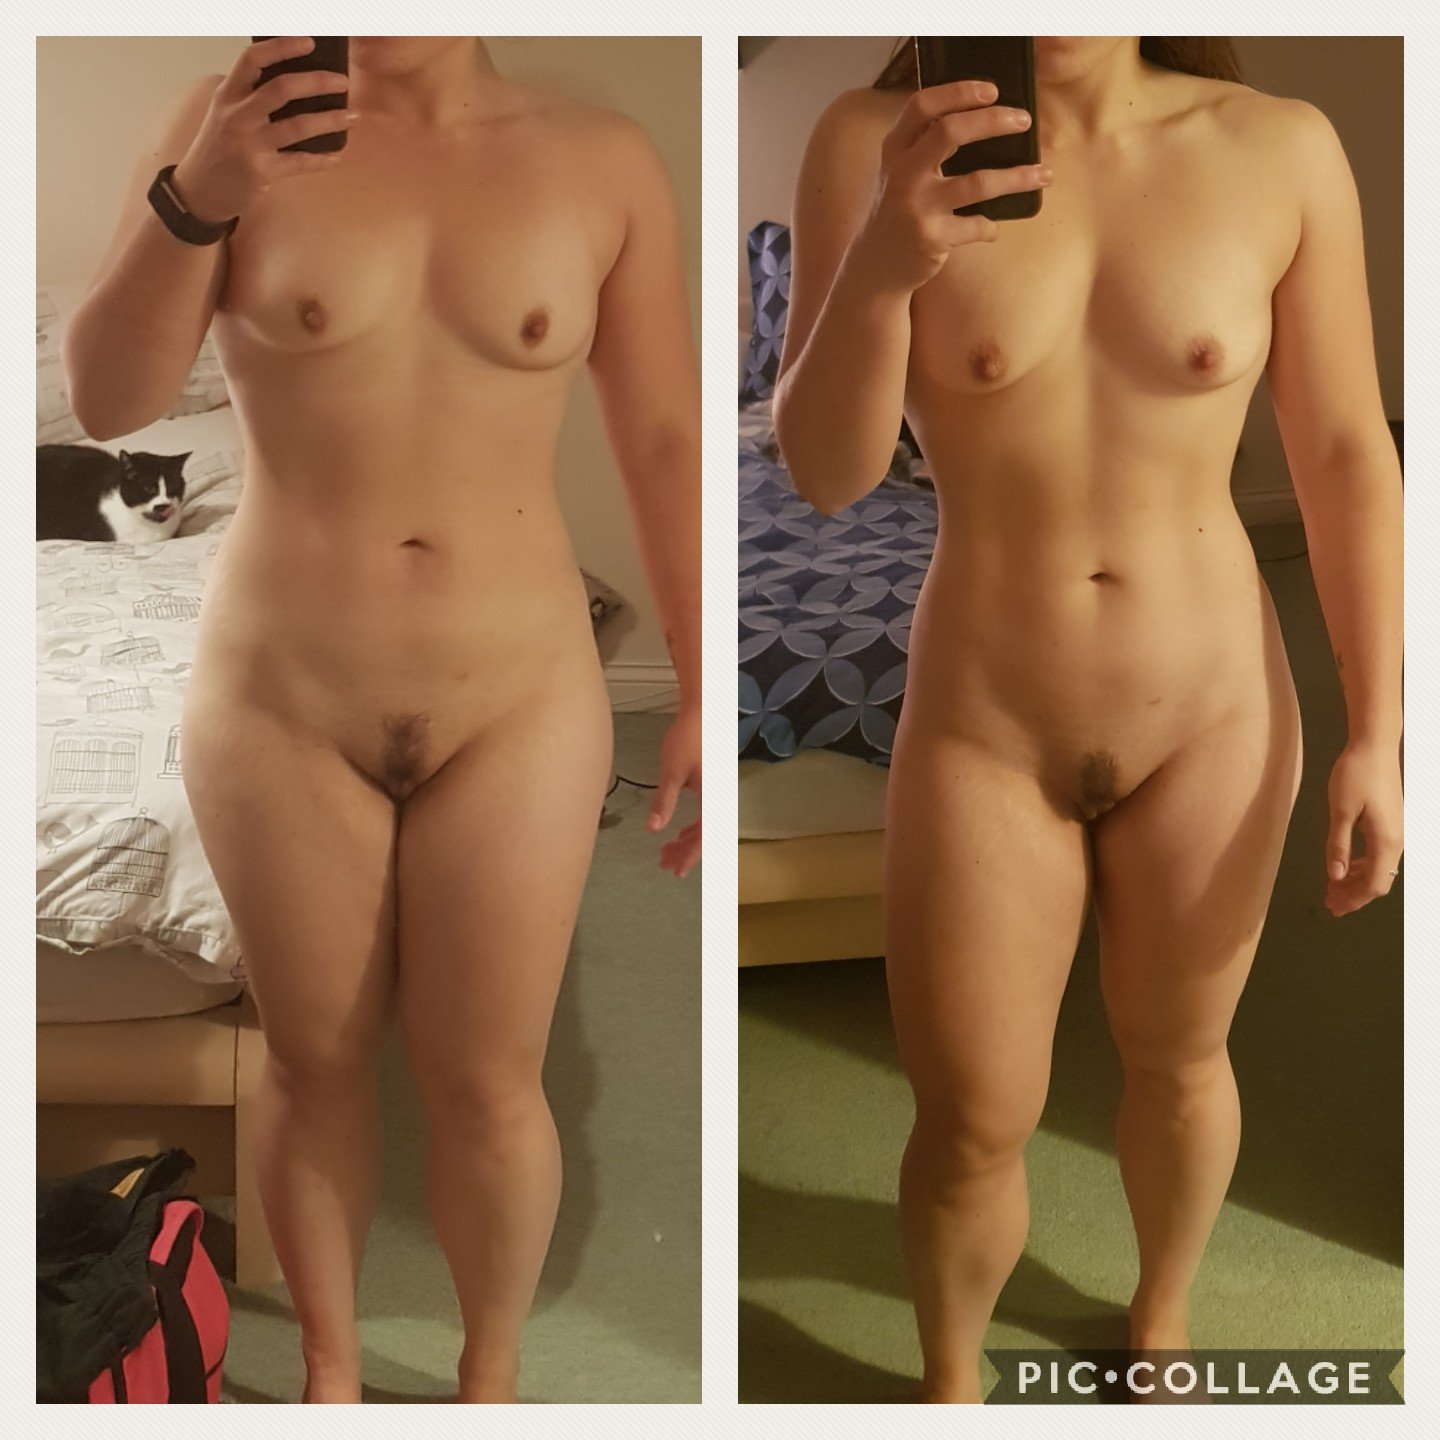 F/30/167lbs - 151lbs/5ft3 these photos are taken 6 weeks apart. I sometimes struggle to see the progress I've made but this is undeniable! I'm so proud of myself.